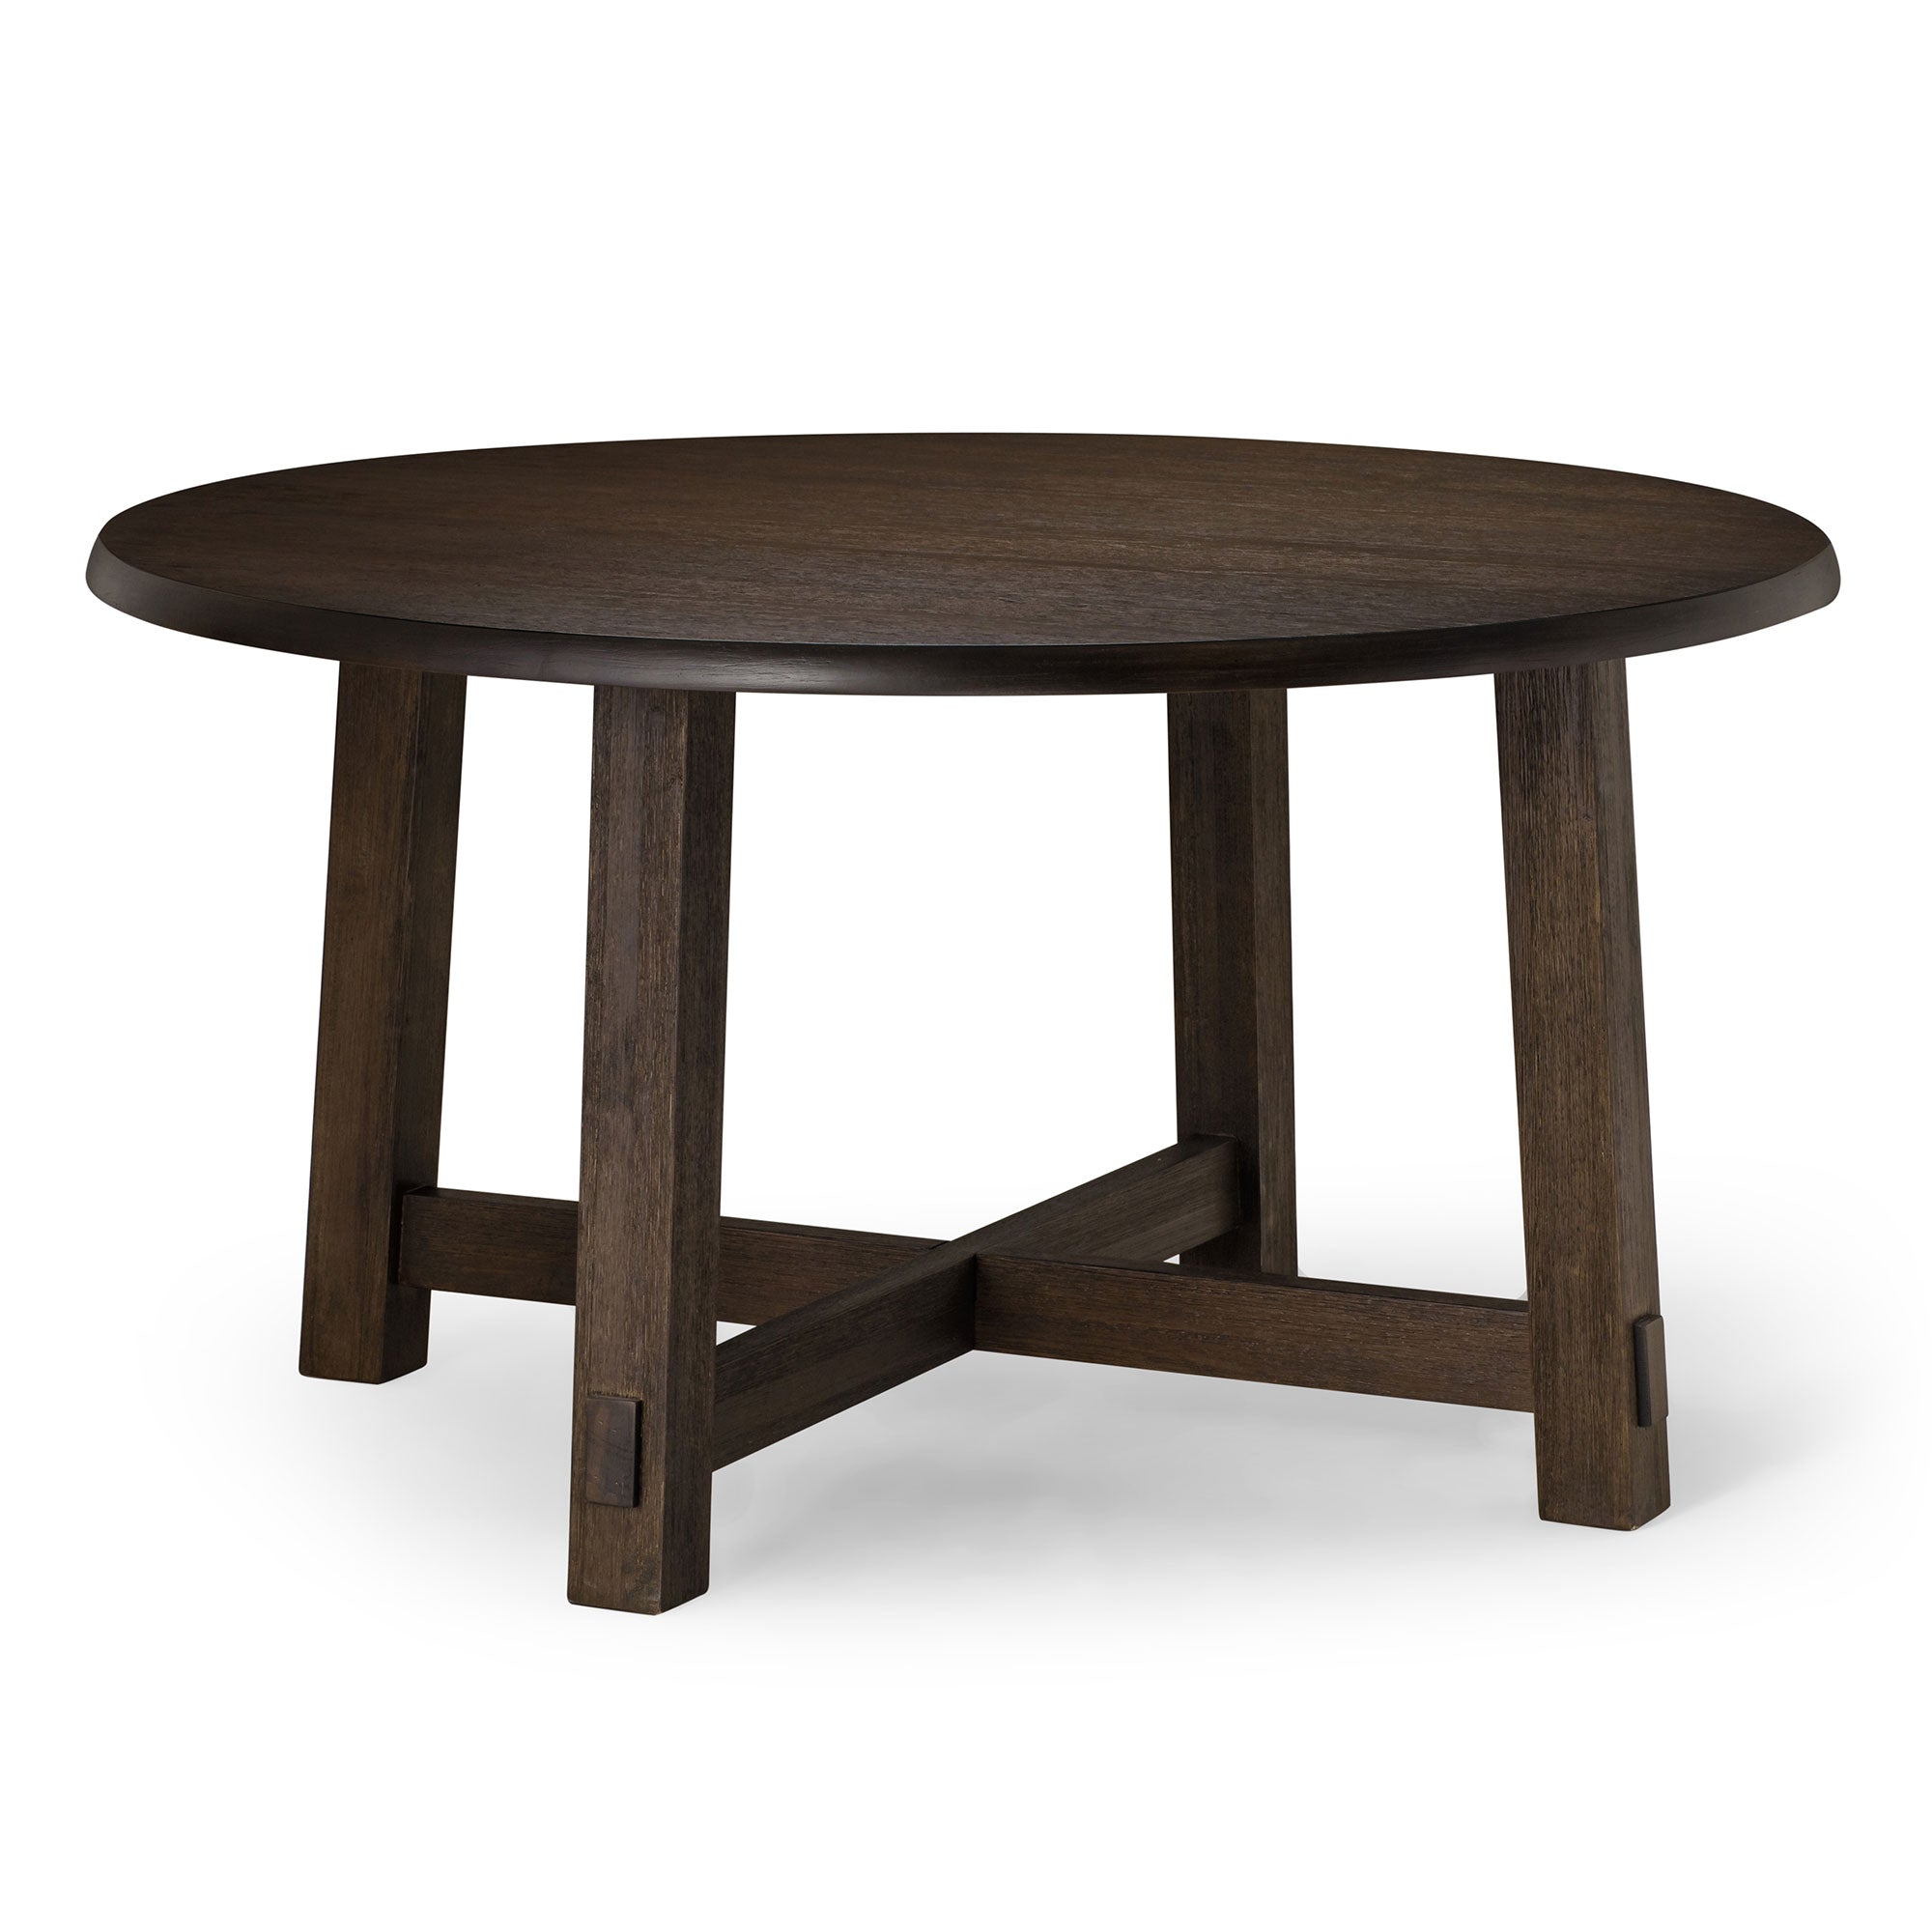 Maven-Lane-Sasha-Round-Wooden-Dining-Table-in-Weathered-Brown-Finish-Kitchen-&-Dining-Room-Tables